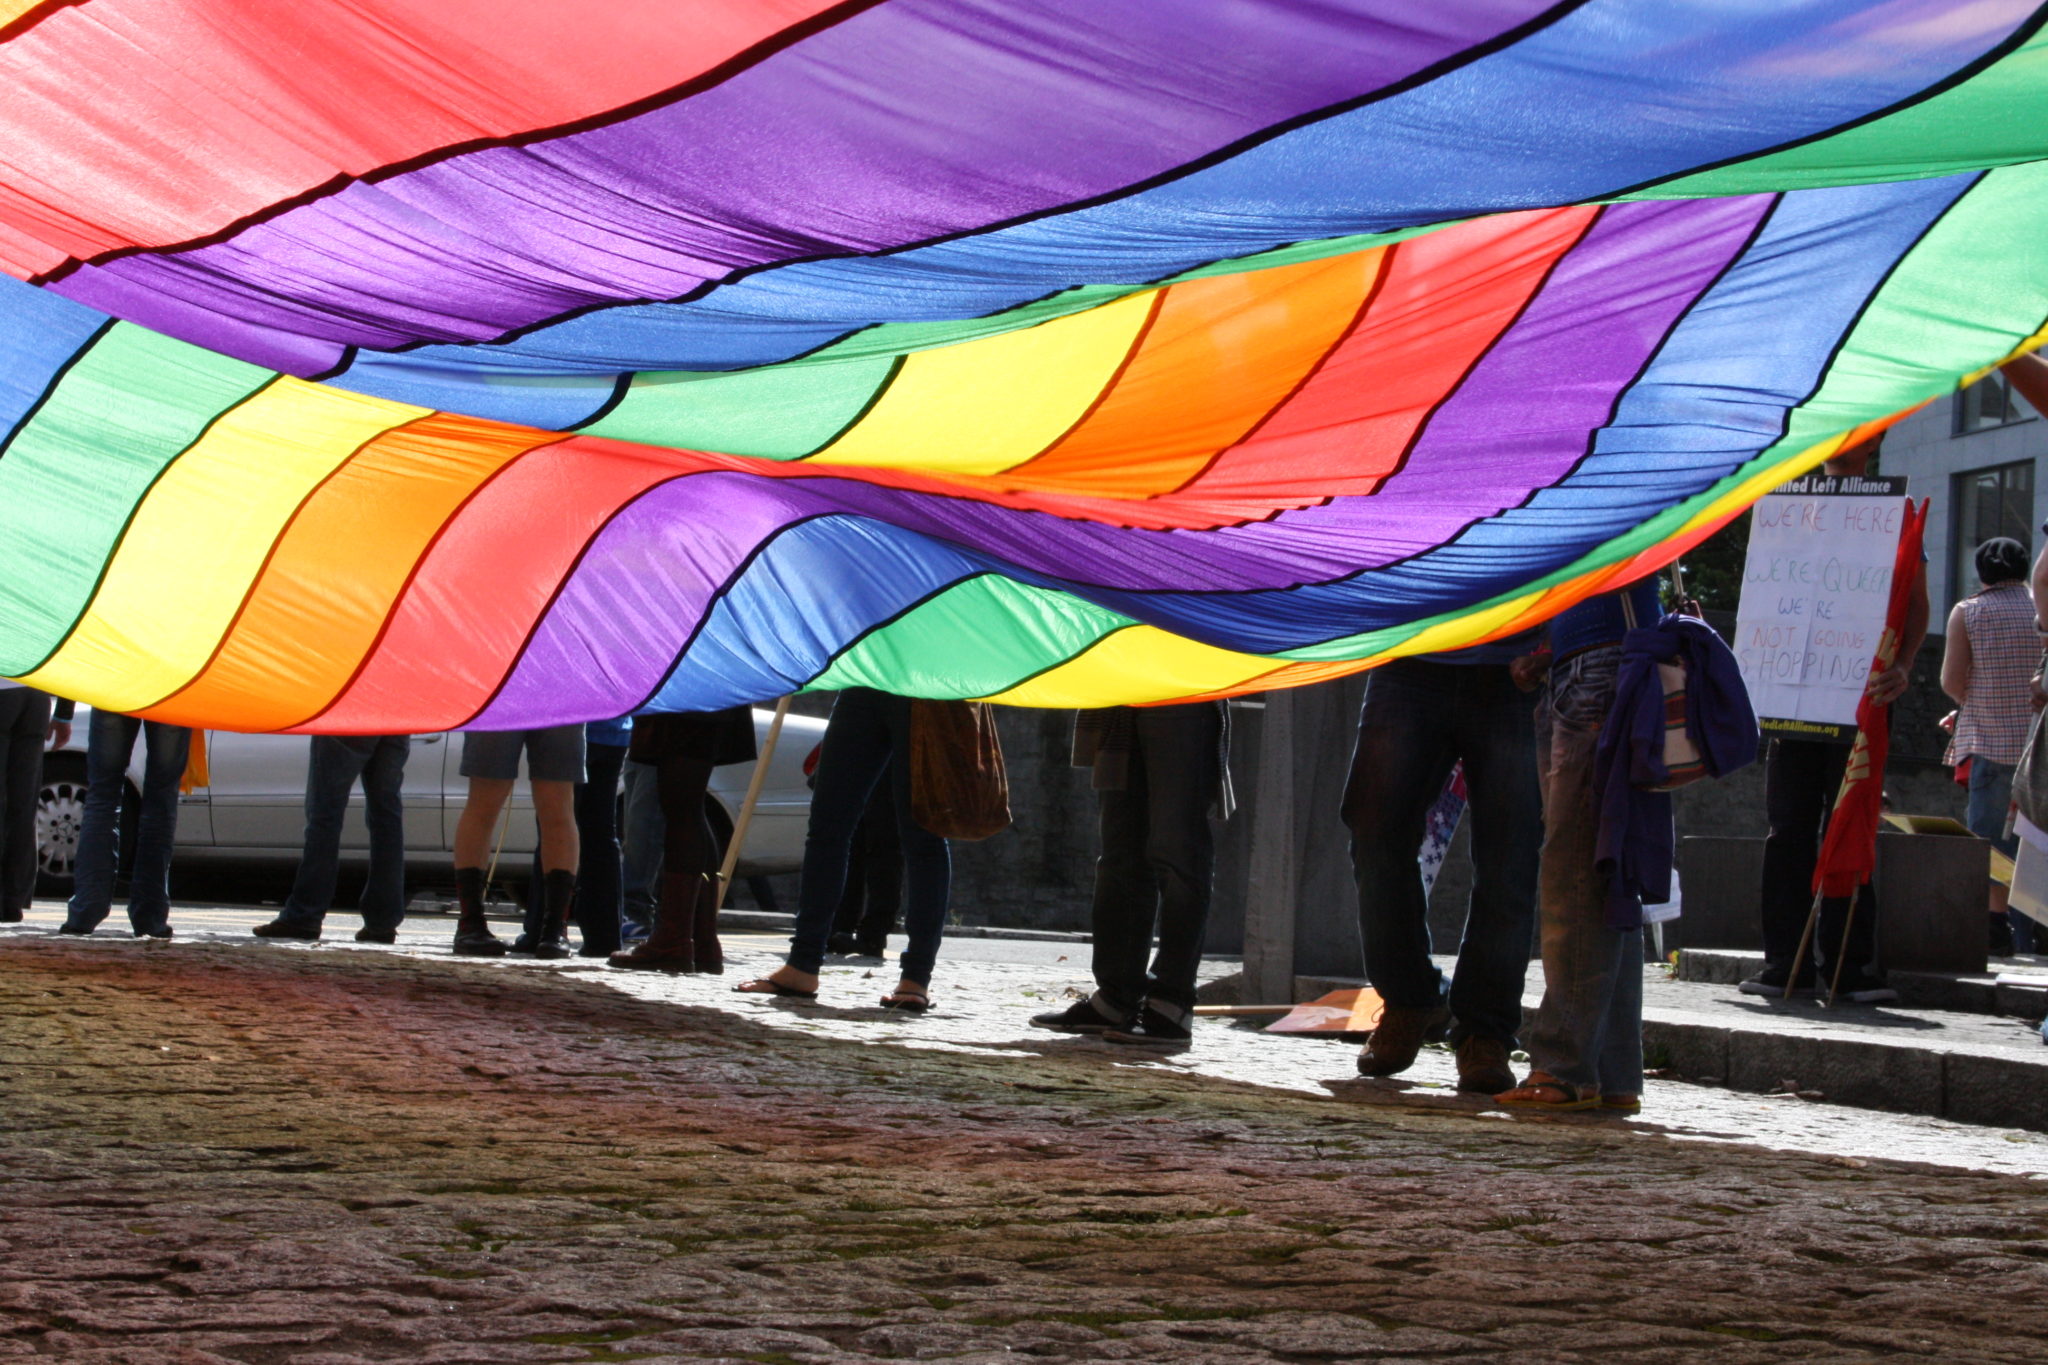 Tanzania: Dangerous plans to ‘hunt down and arrest’ LGBTI people must be abandoned immediately